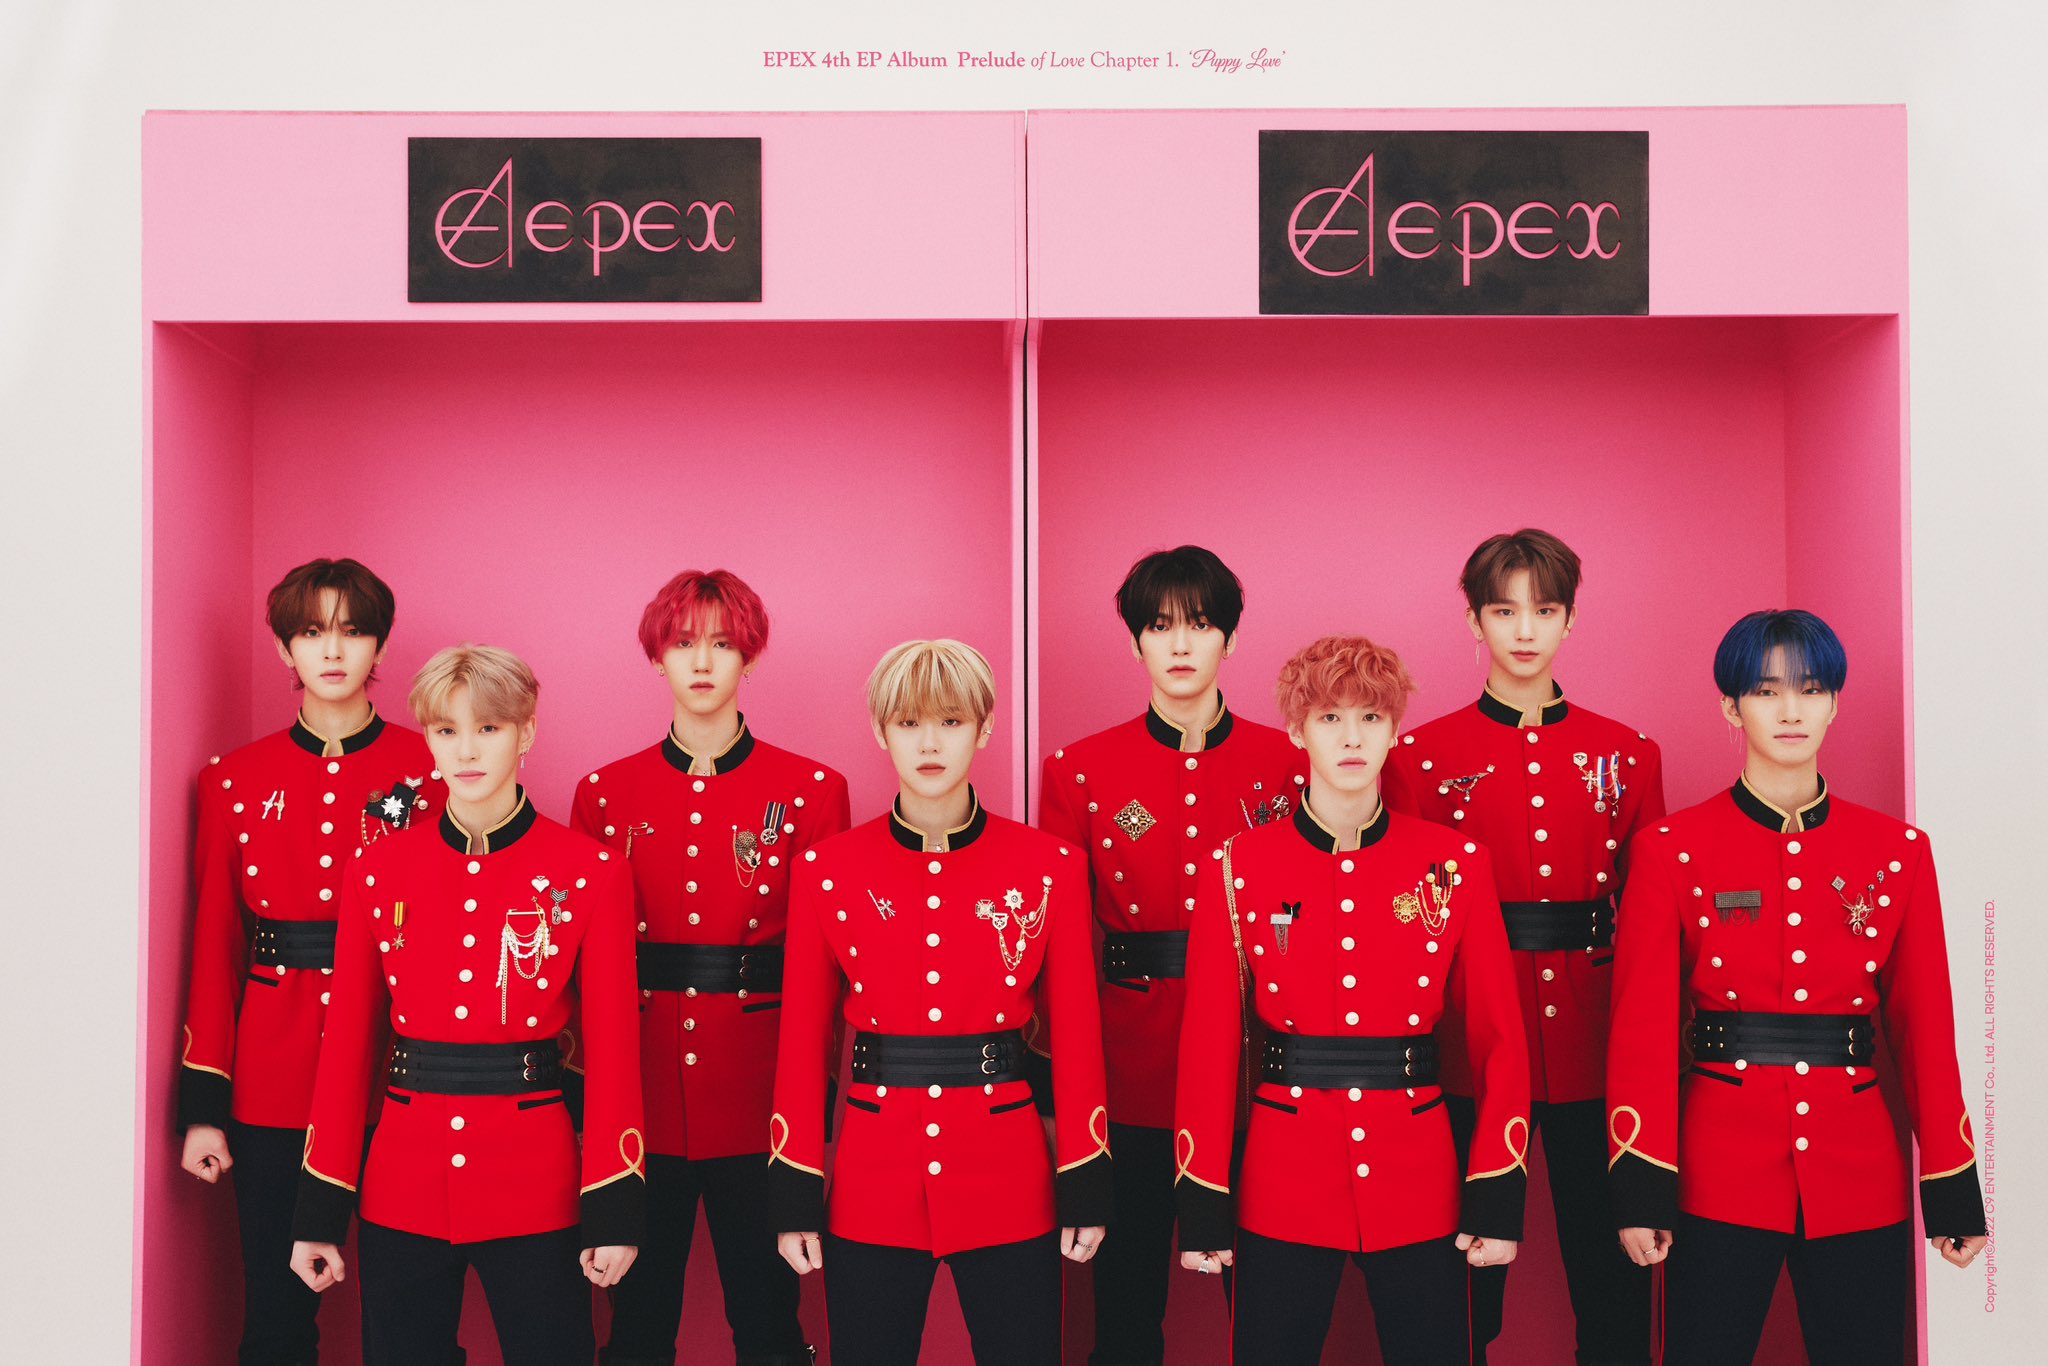 The members of EPEX wear read uniforms in front of a pink background